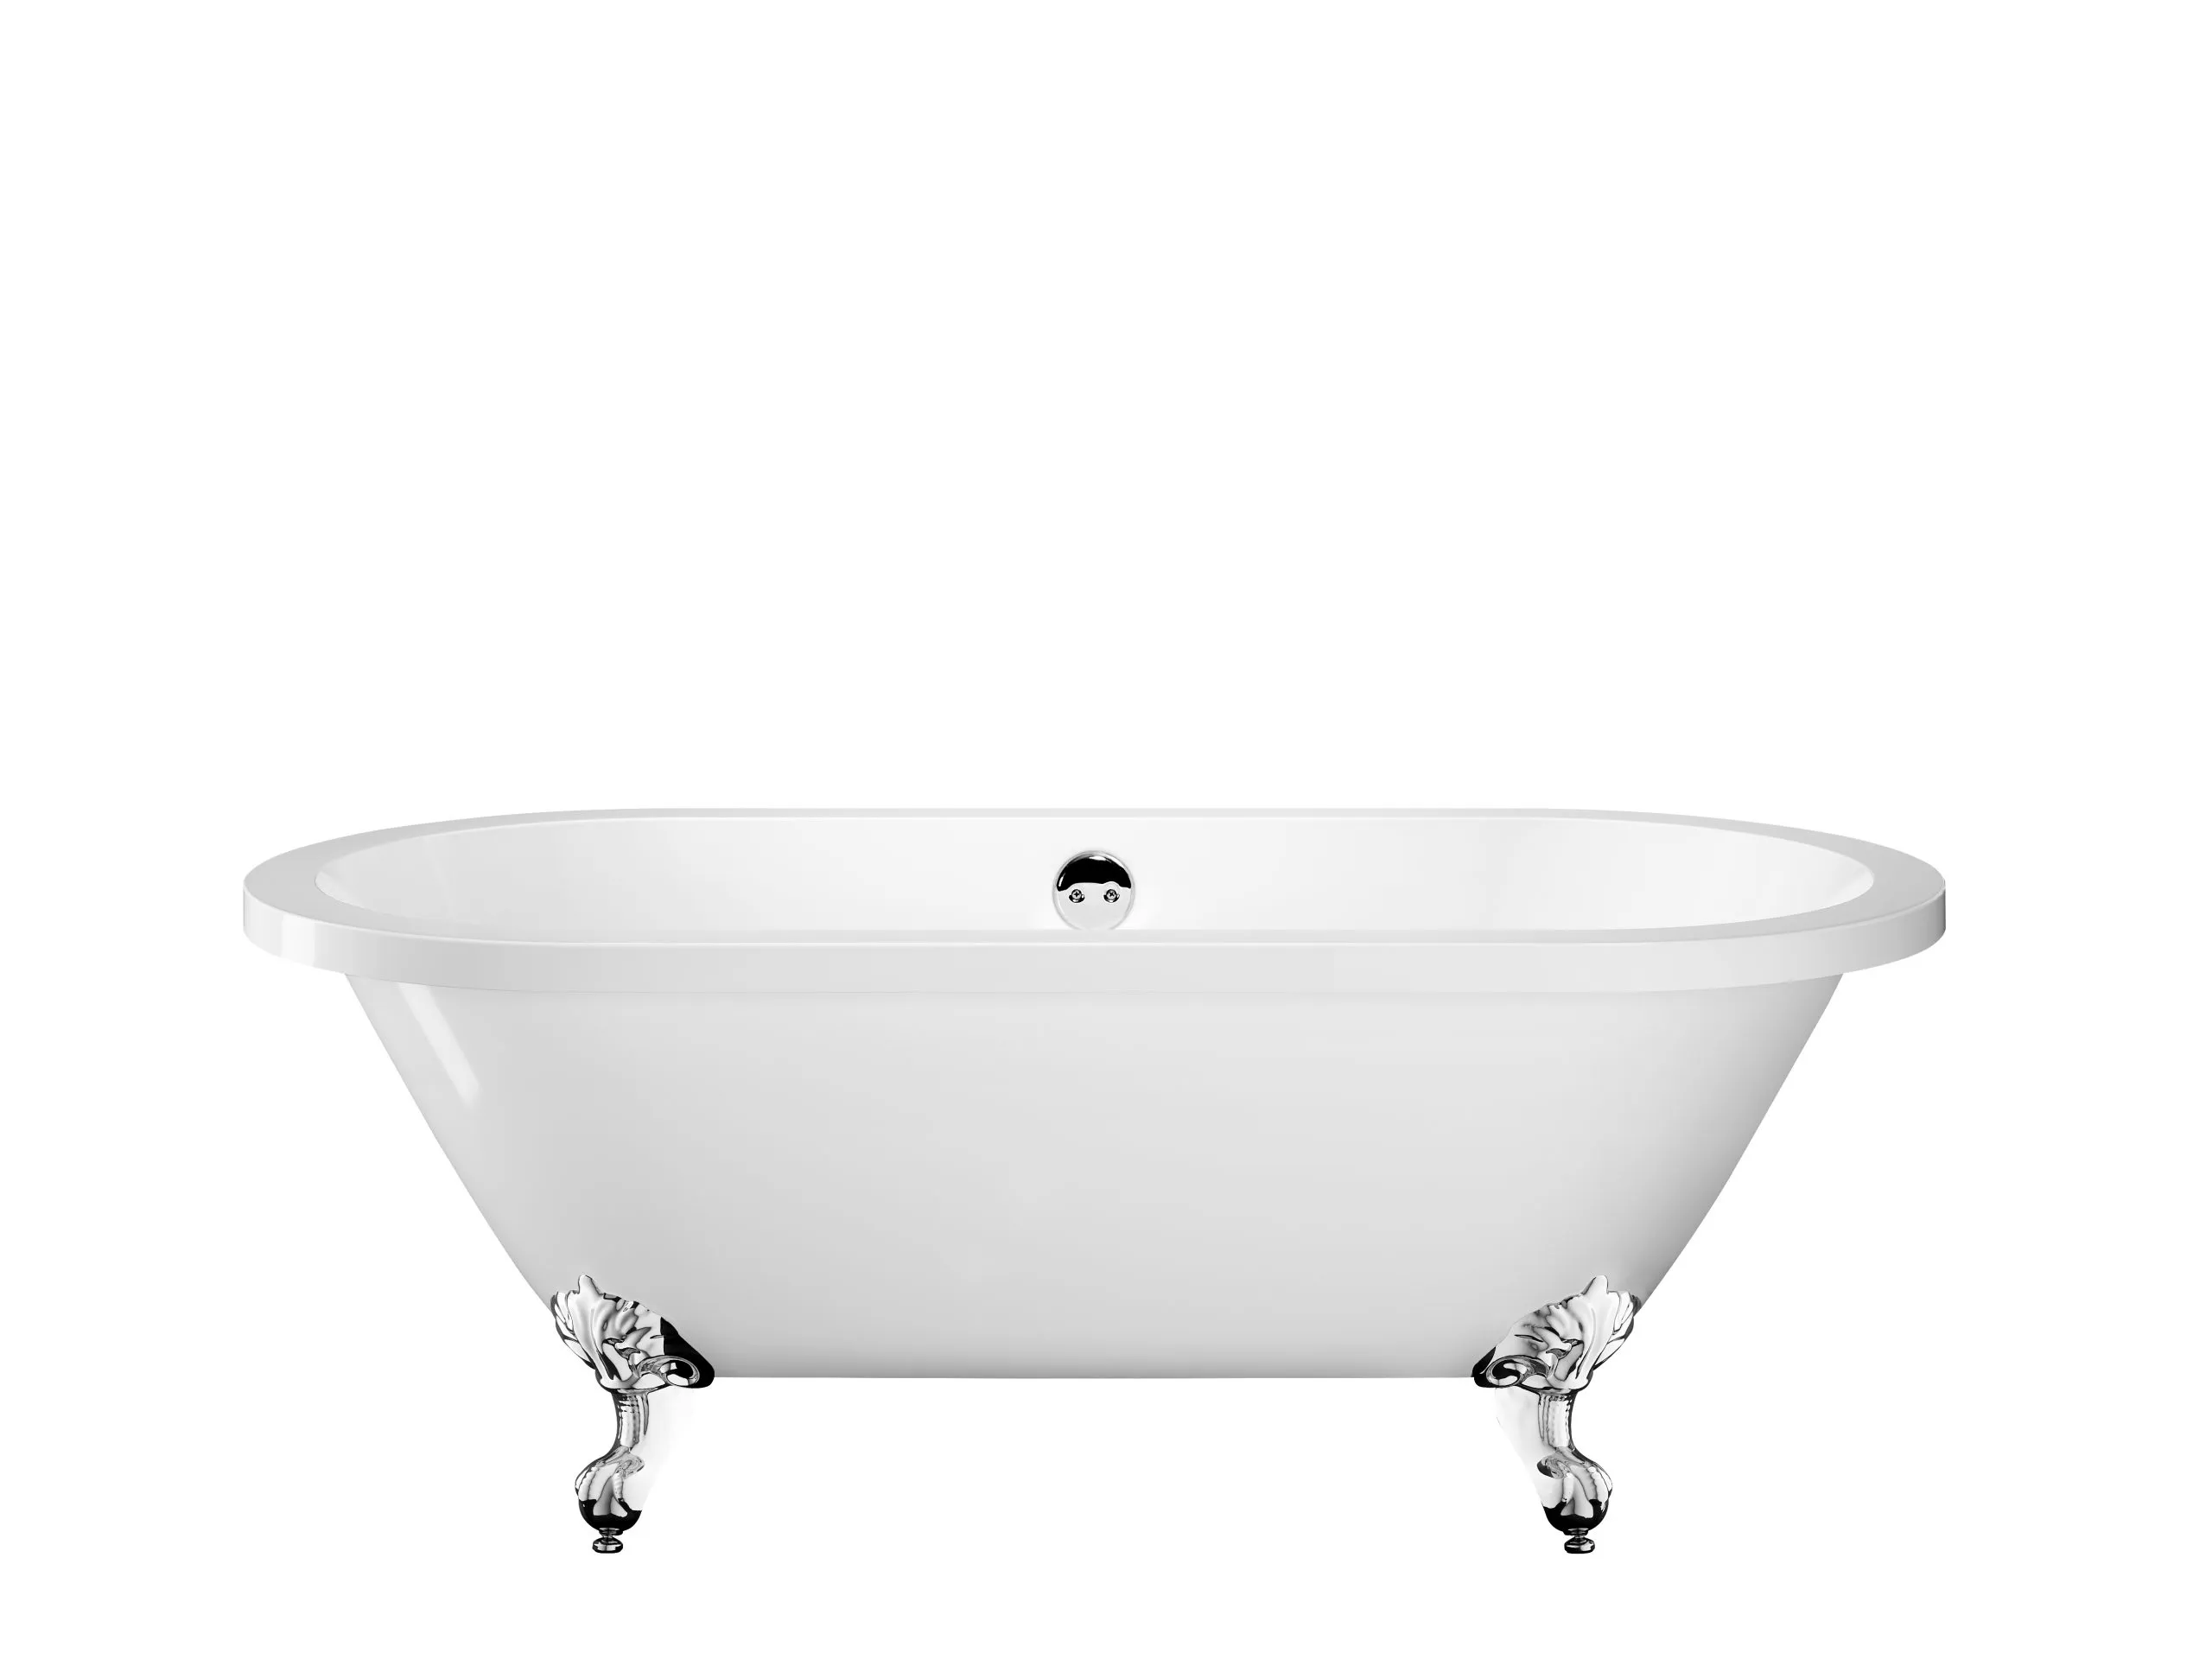 Are there any floor constraints for the installation of the clawfoot tub?